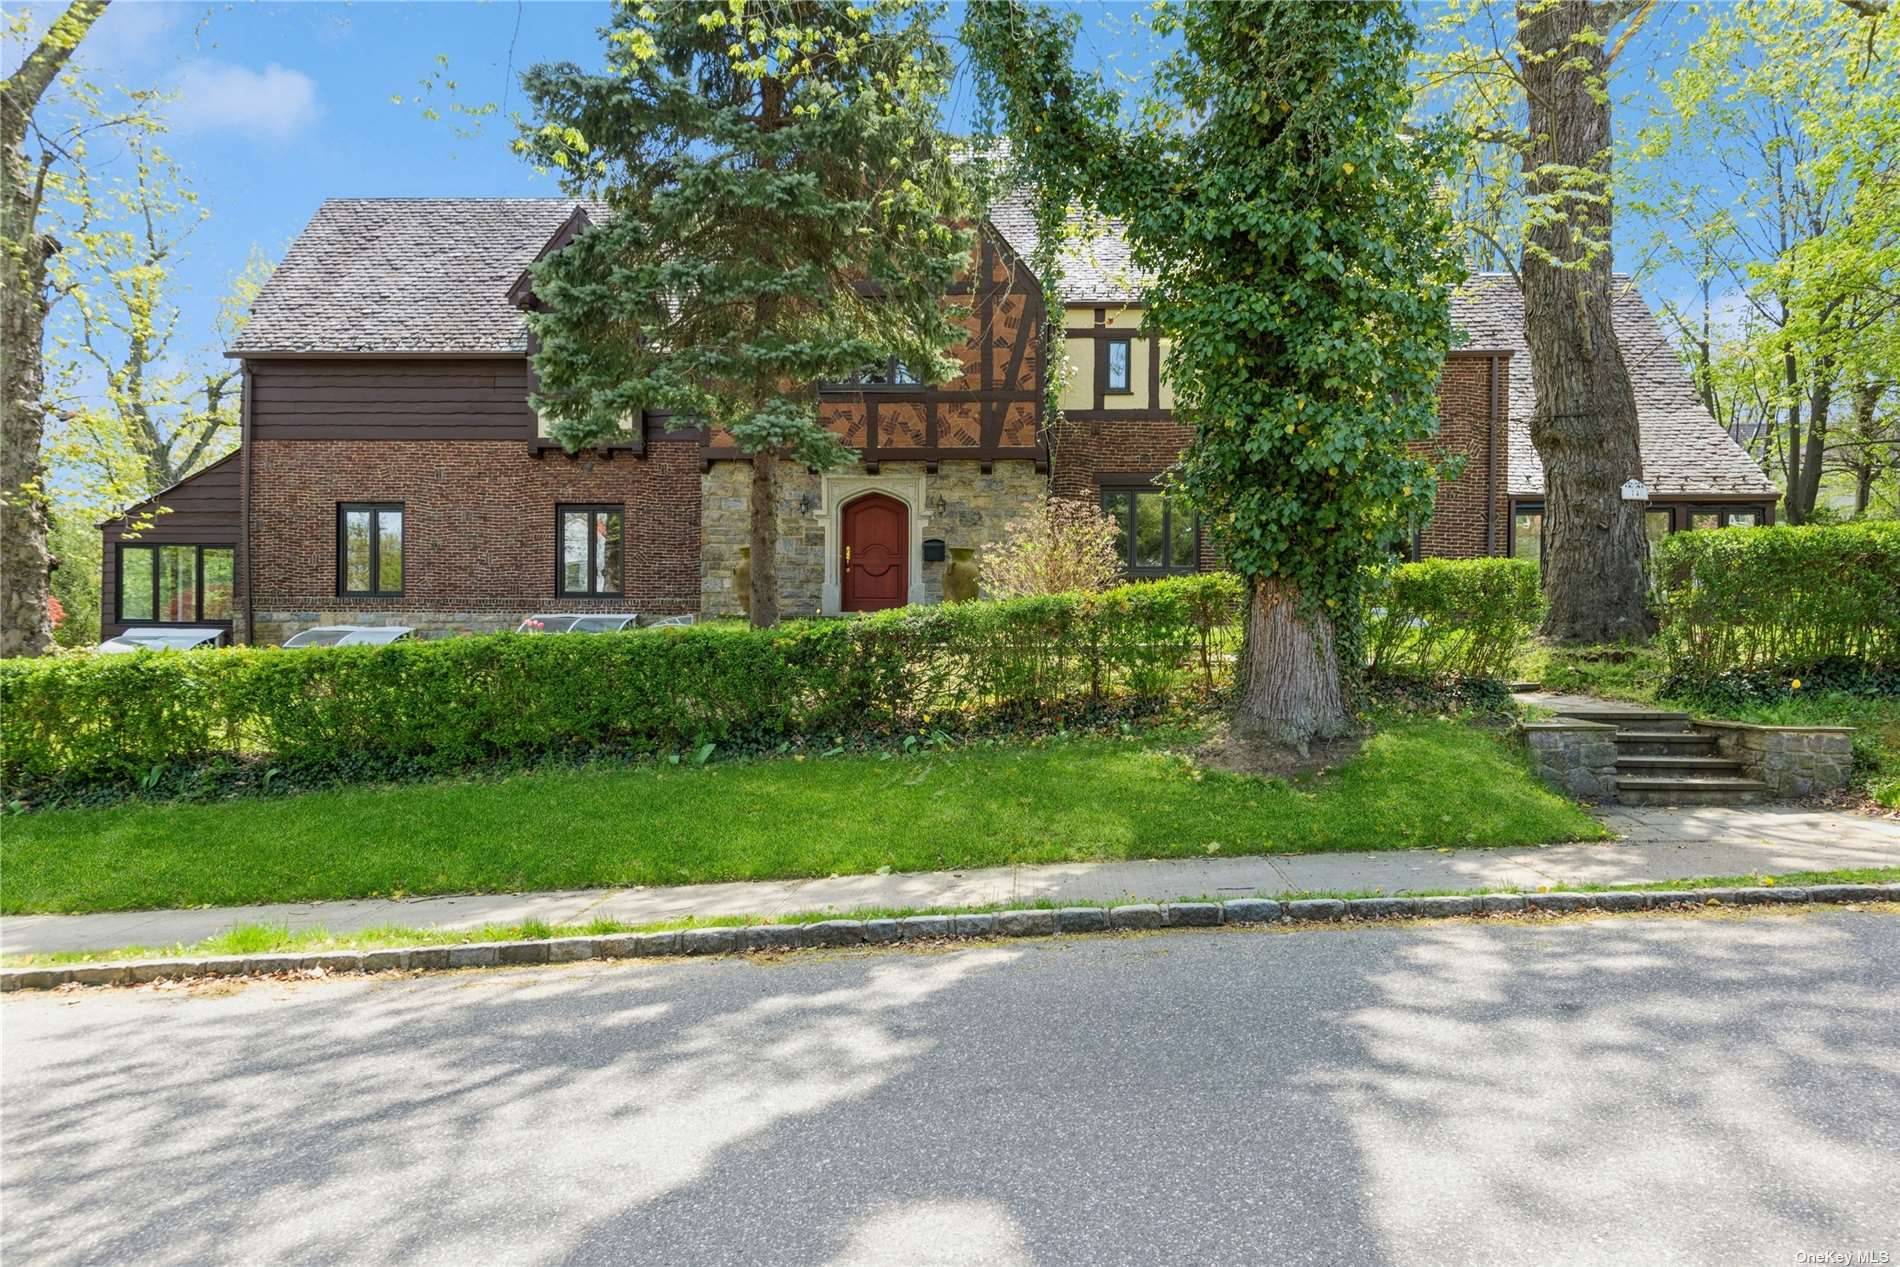 Welcome to this spectacular Tudor home boasting six bedrooms and four full bathrooms with 3 half baths.